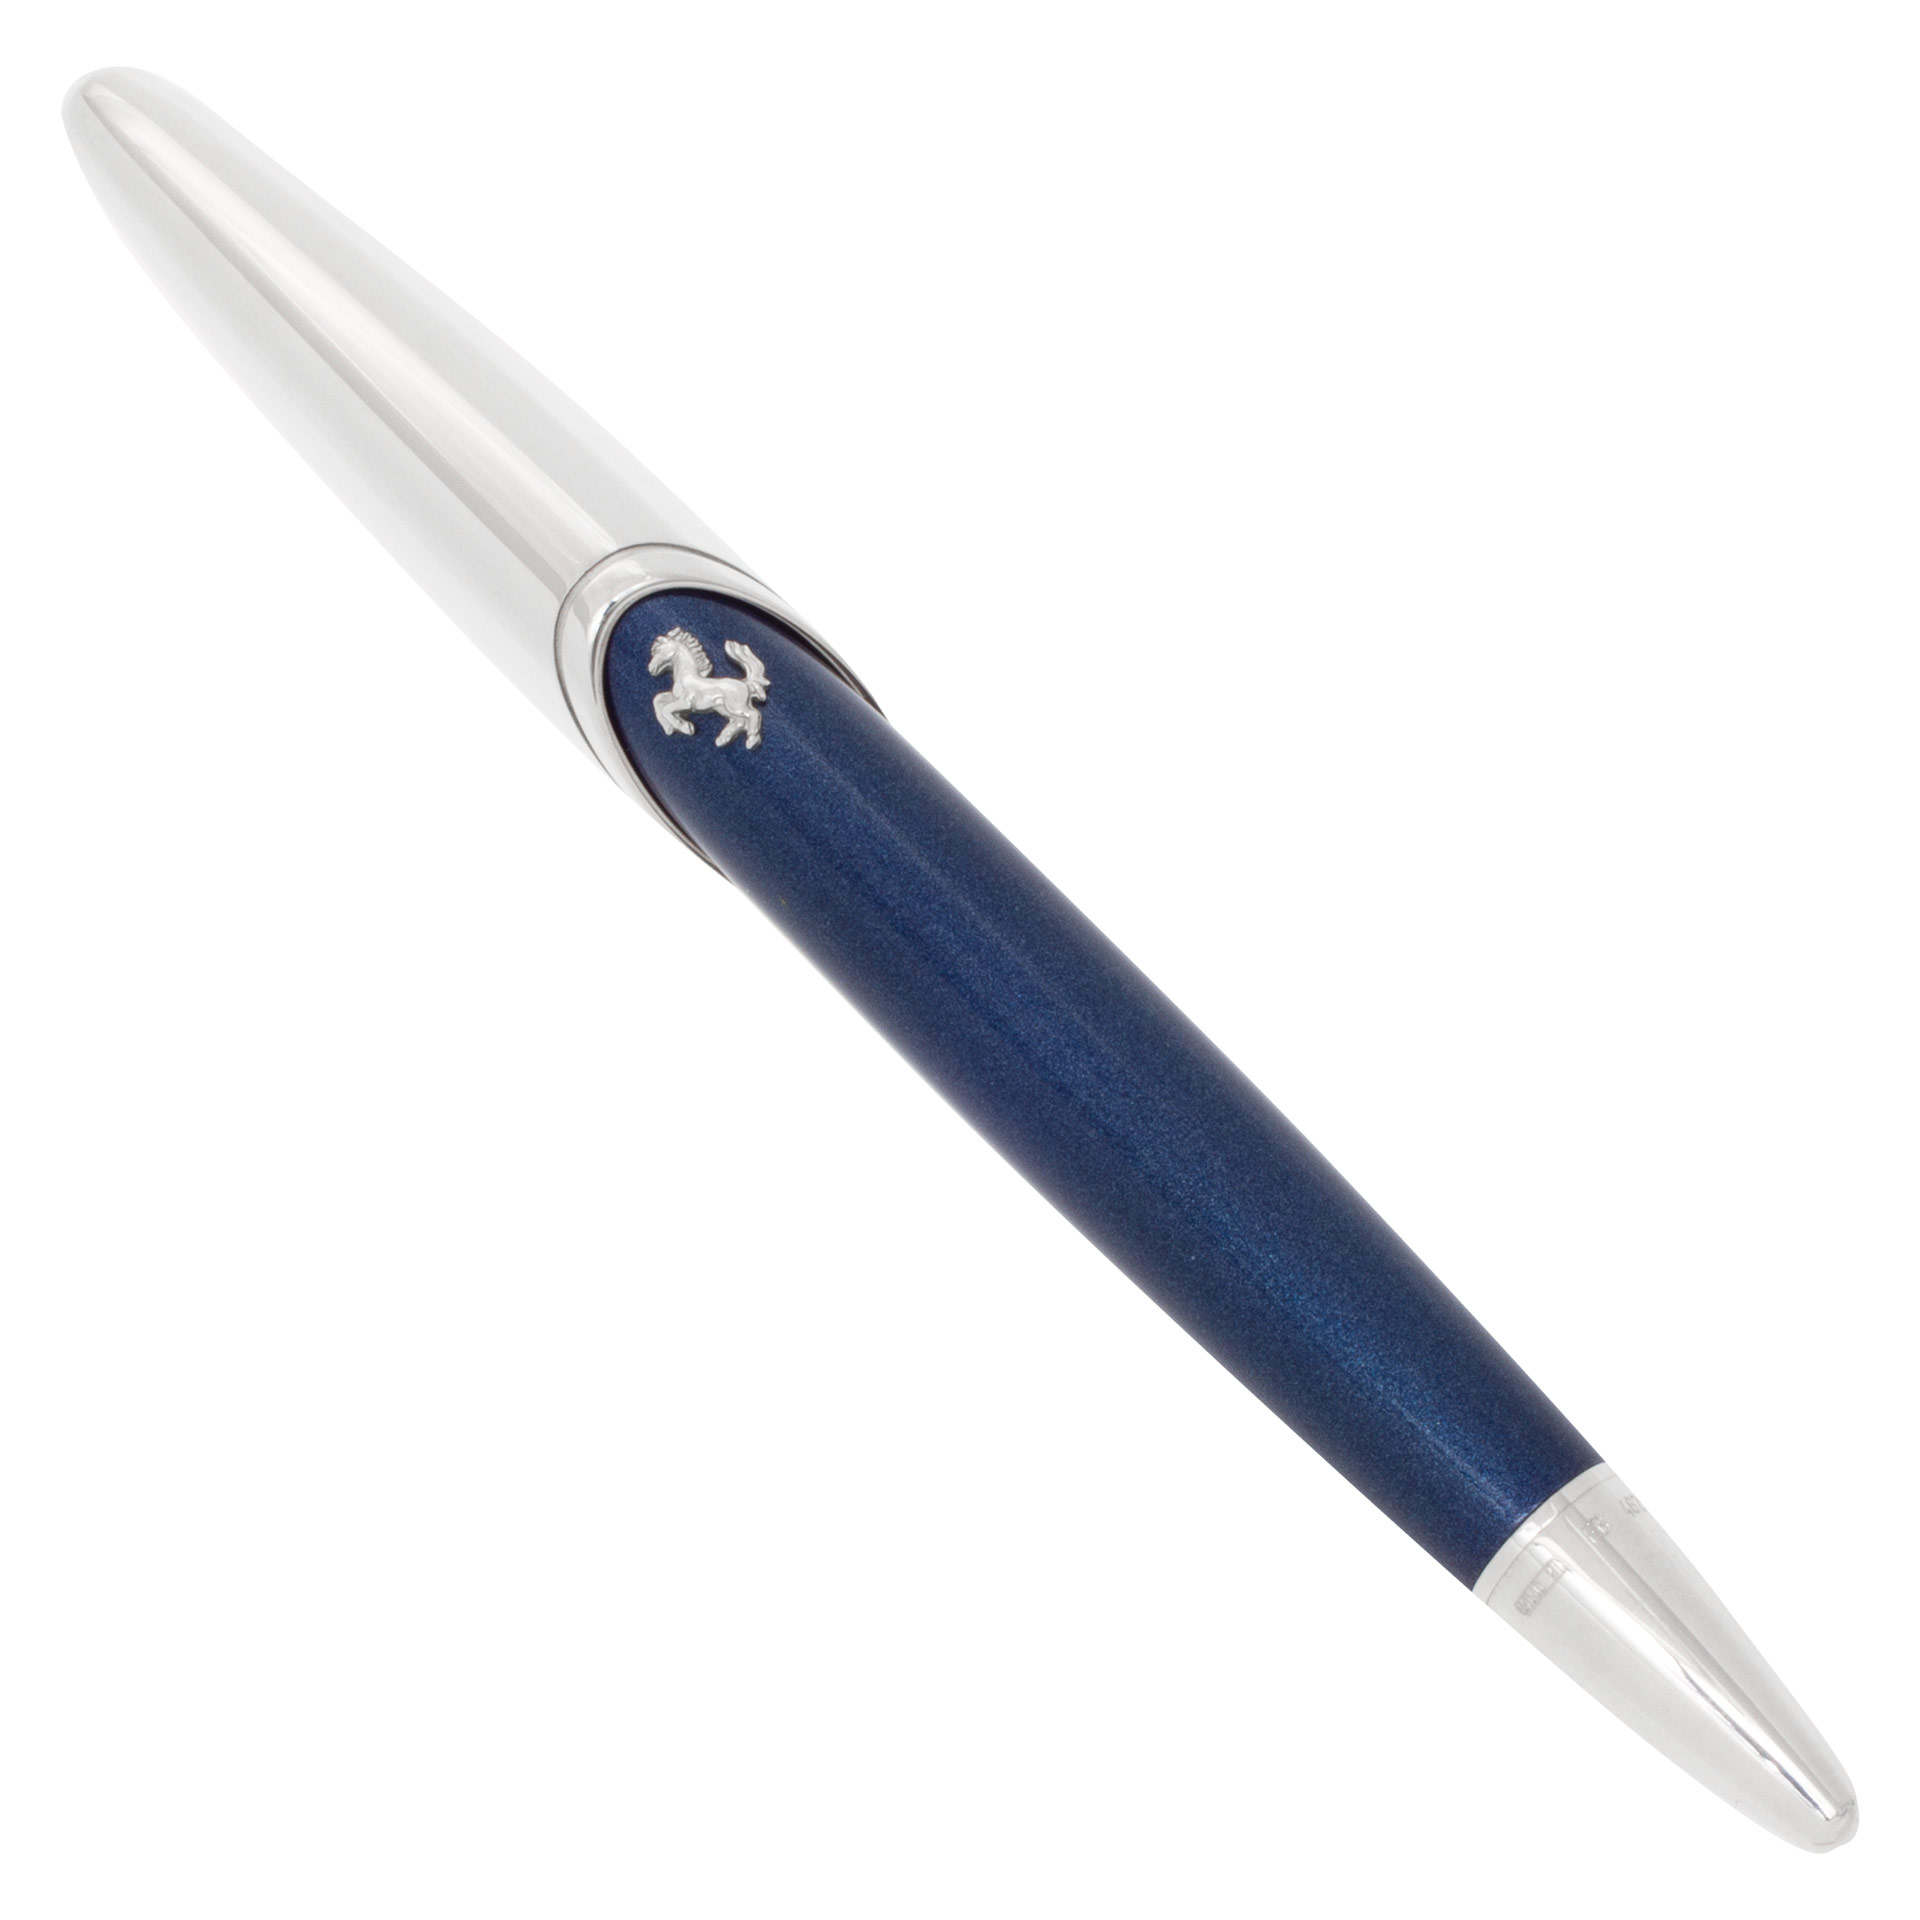 Ferrari Montegrappa limited edition rollerball pen in sterling silver and lacquer mira beau blue image 1